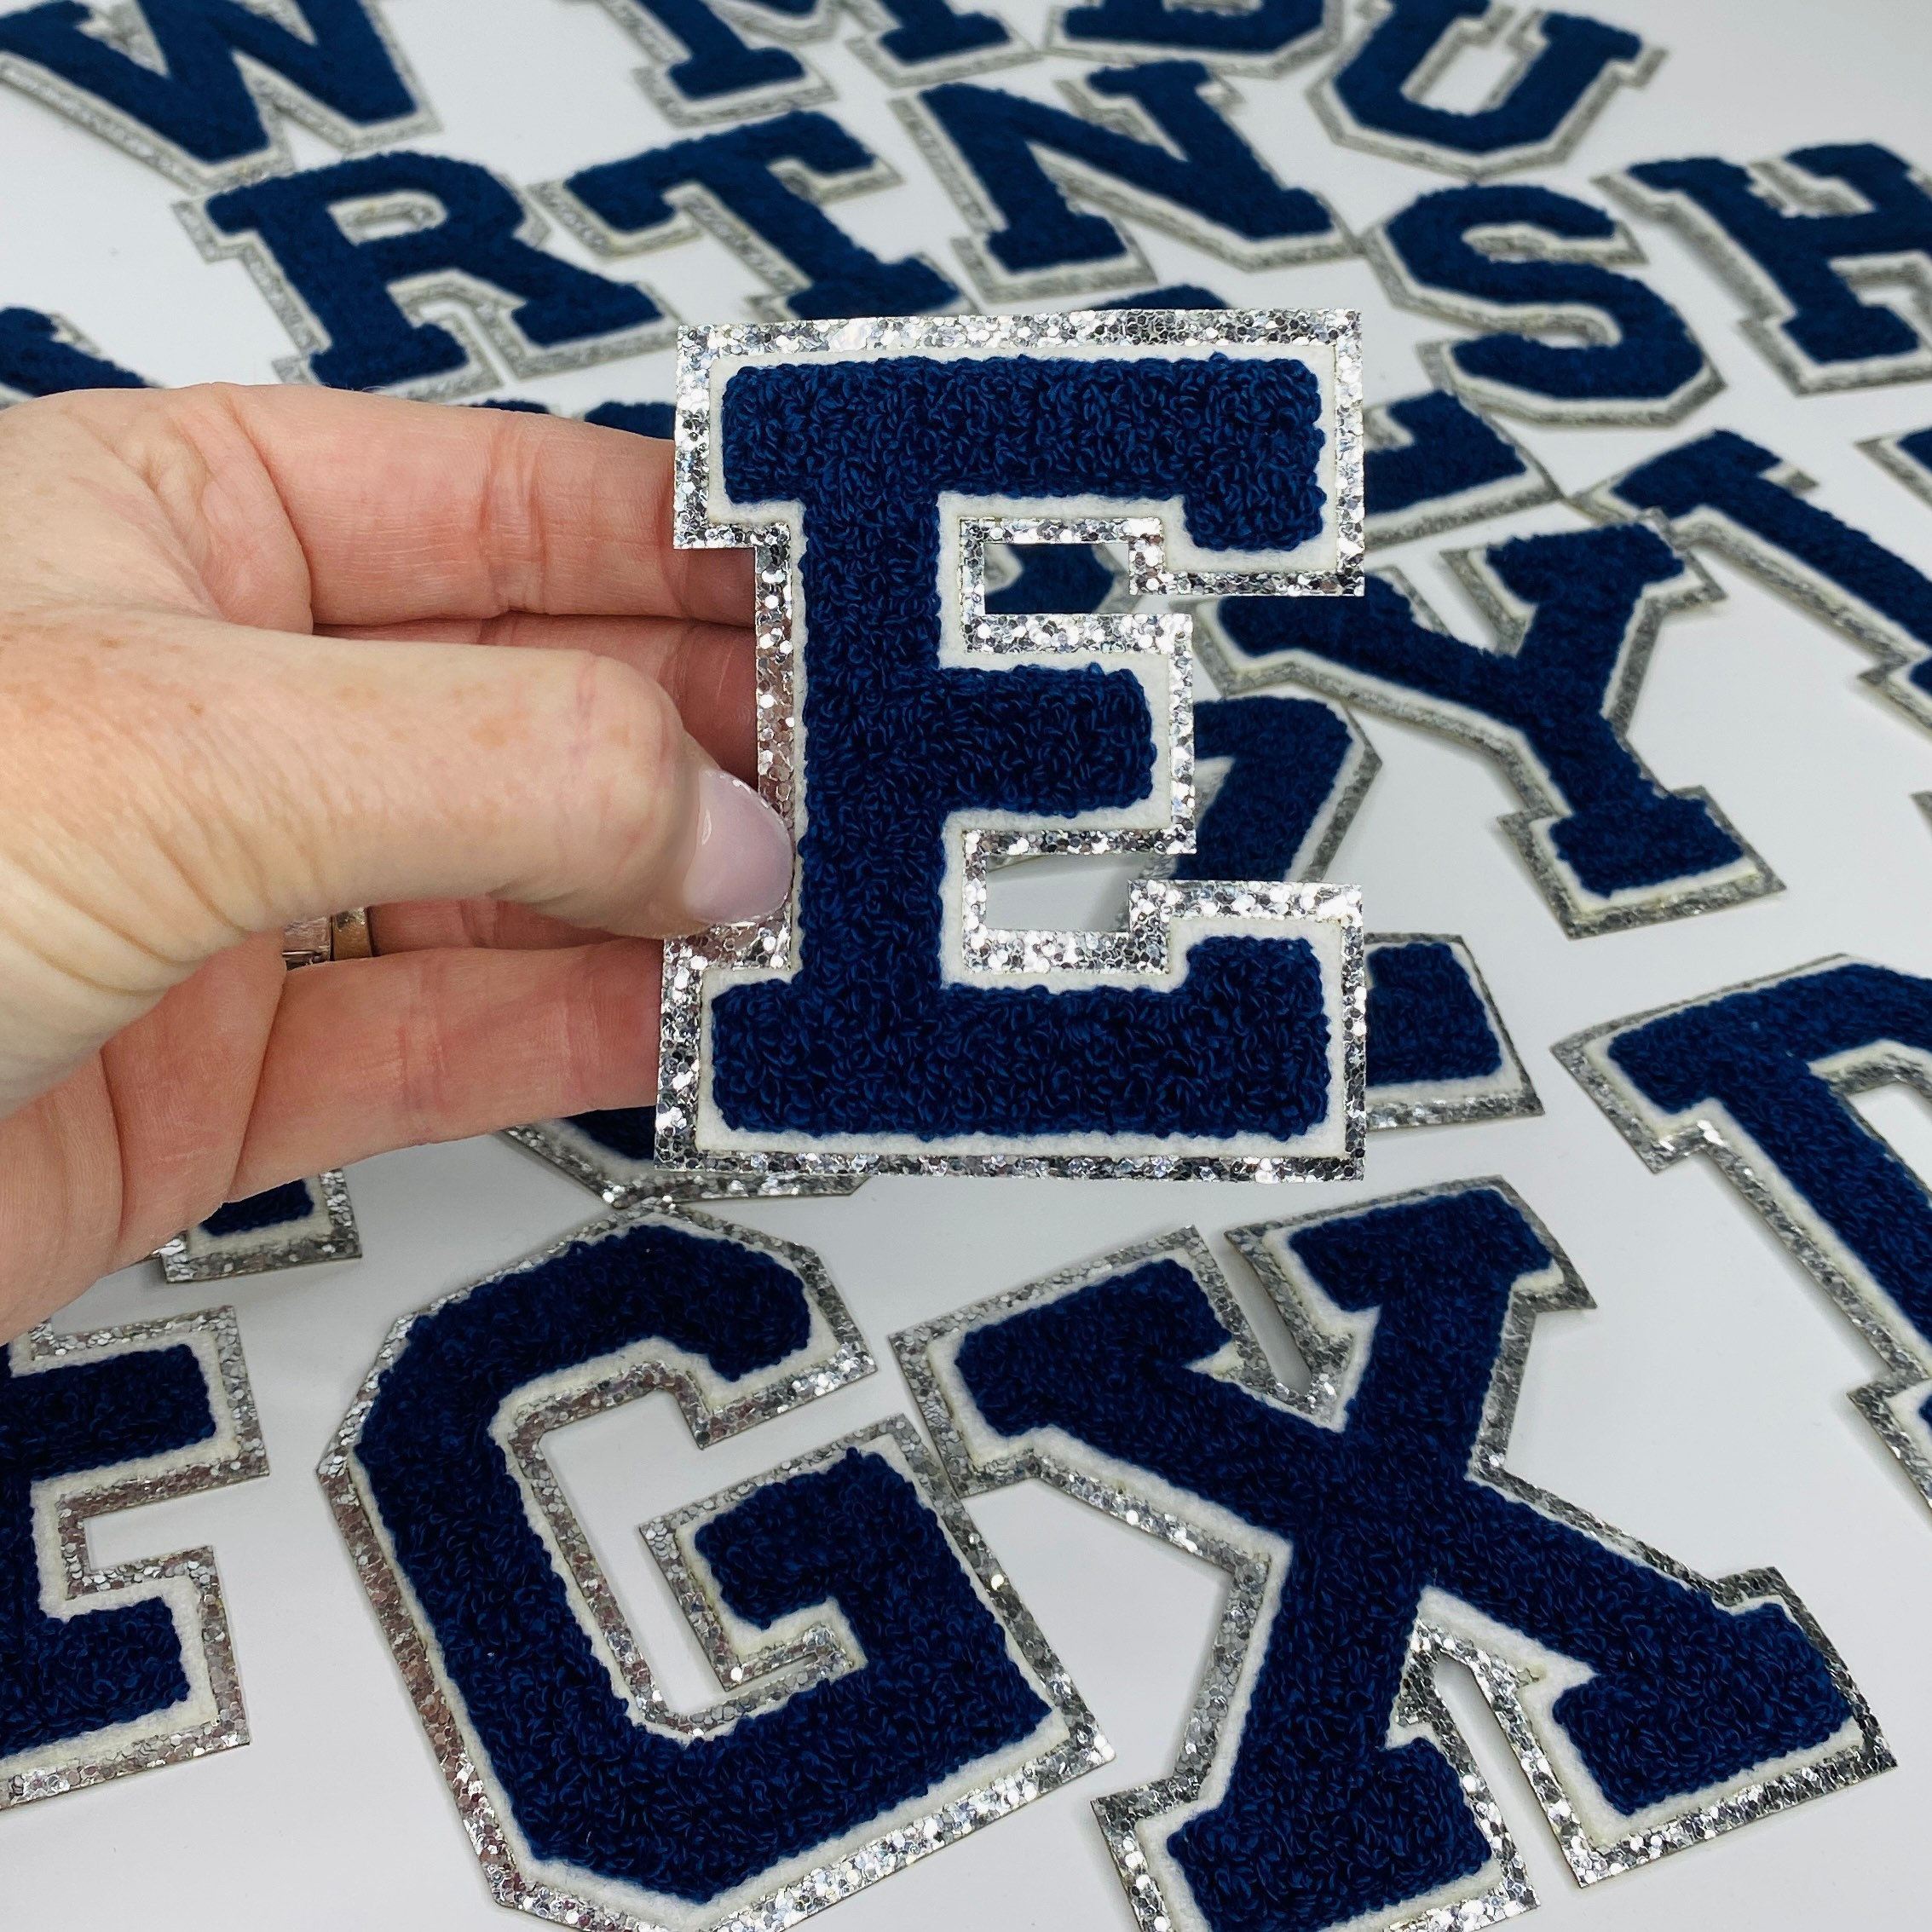 DTBAIYYN chenille Alphabet Letters Patches Iron on Letters for clothing  Royal Blue O chenille Letters for Jacket Varsity Letter Patches g